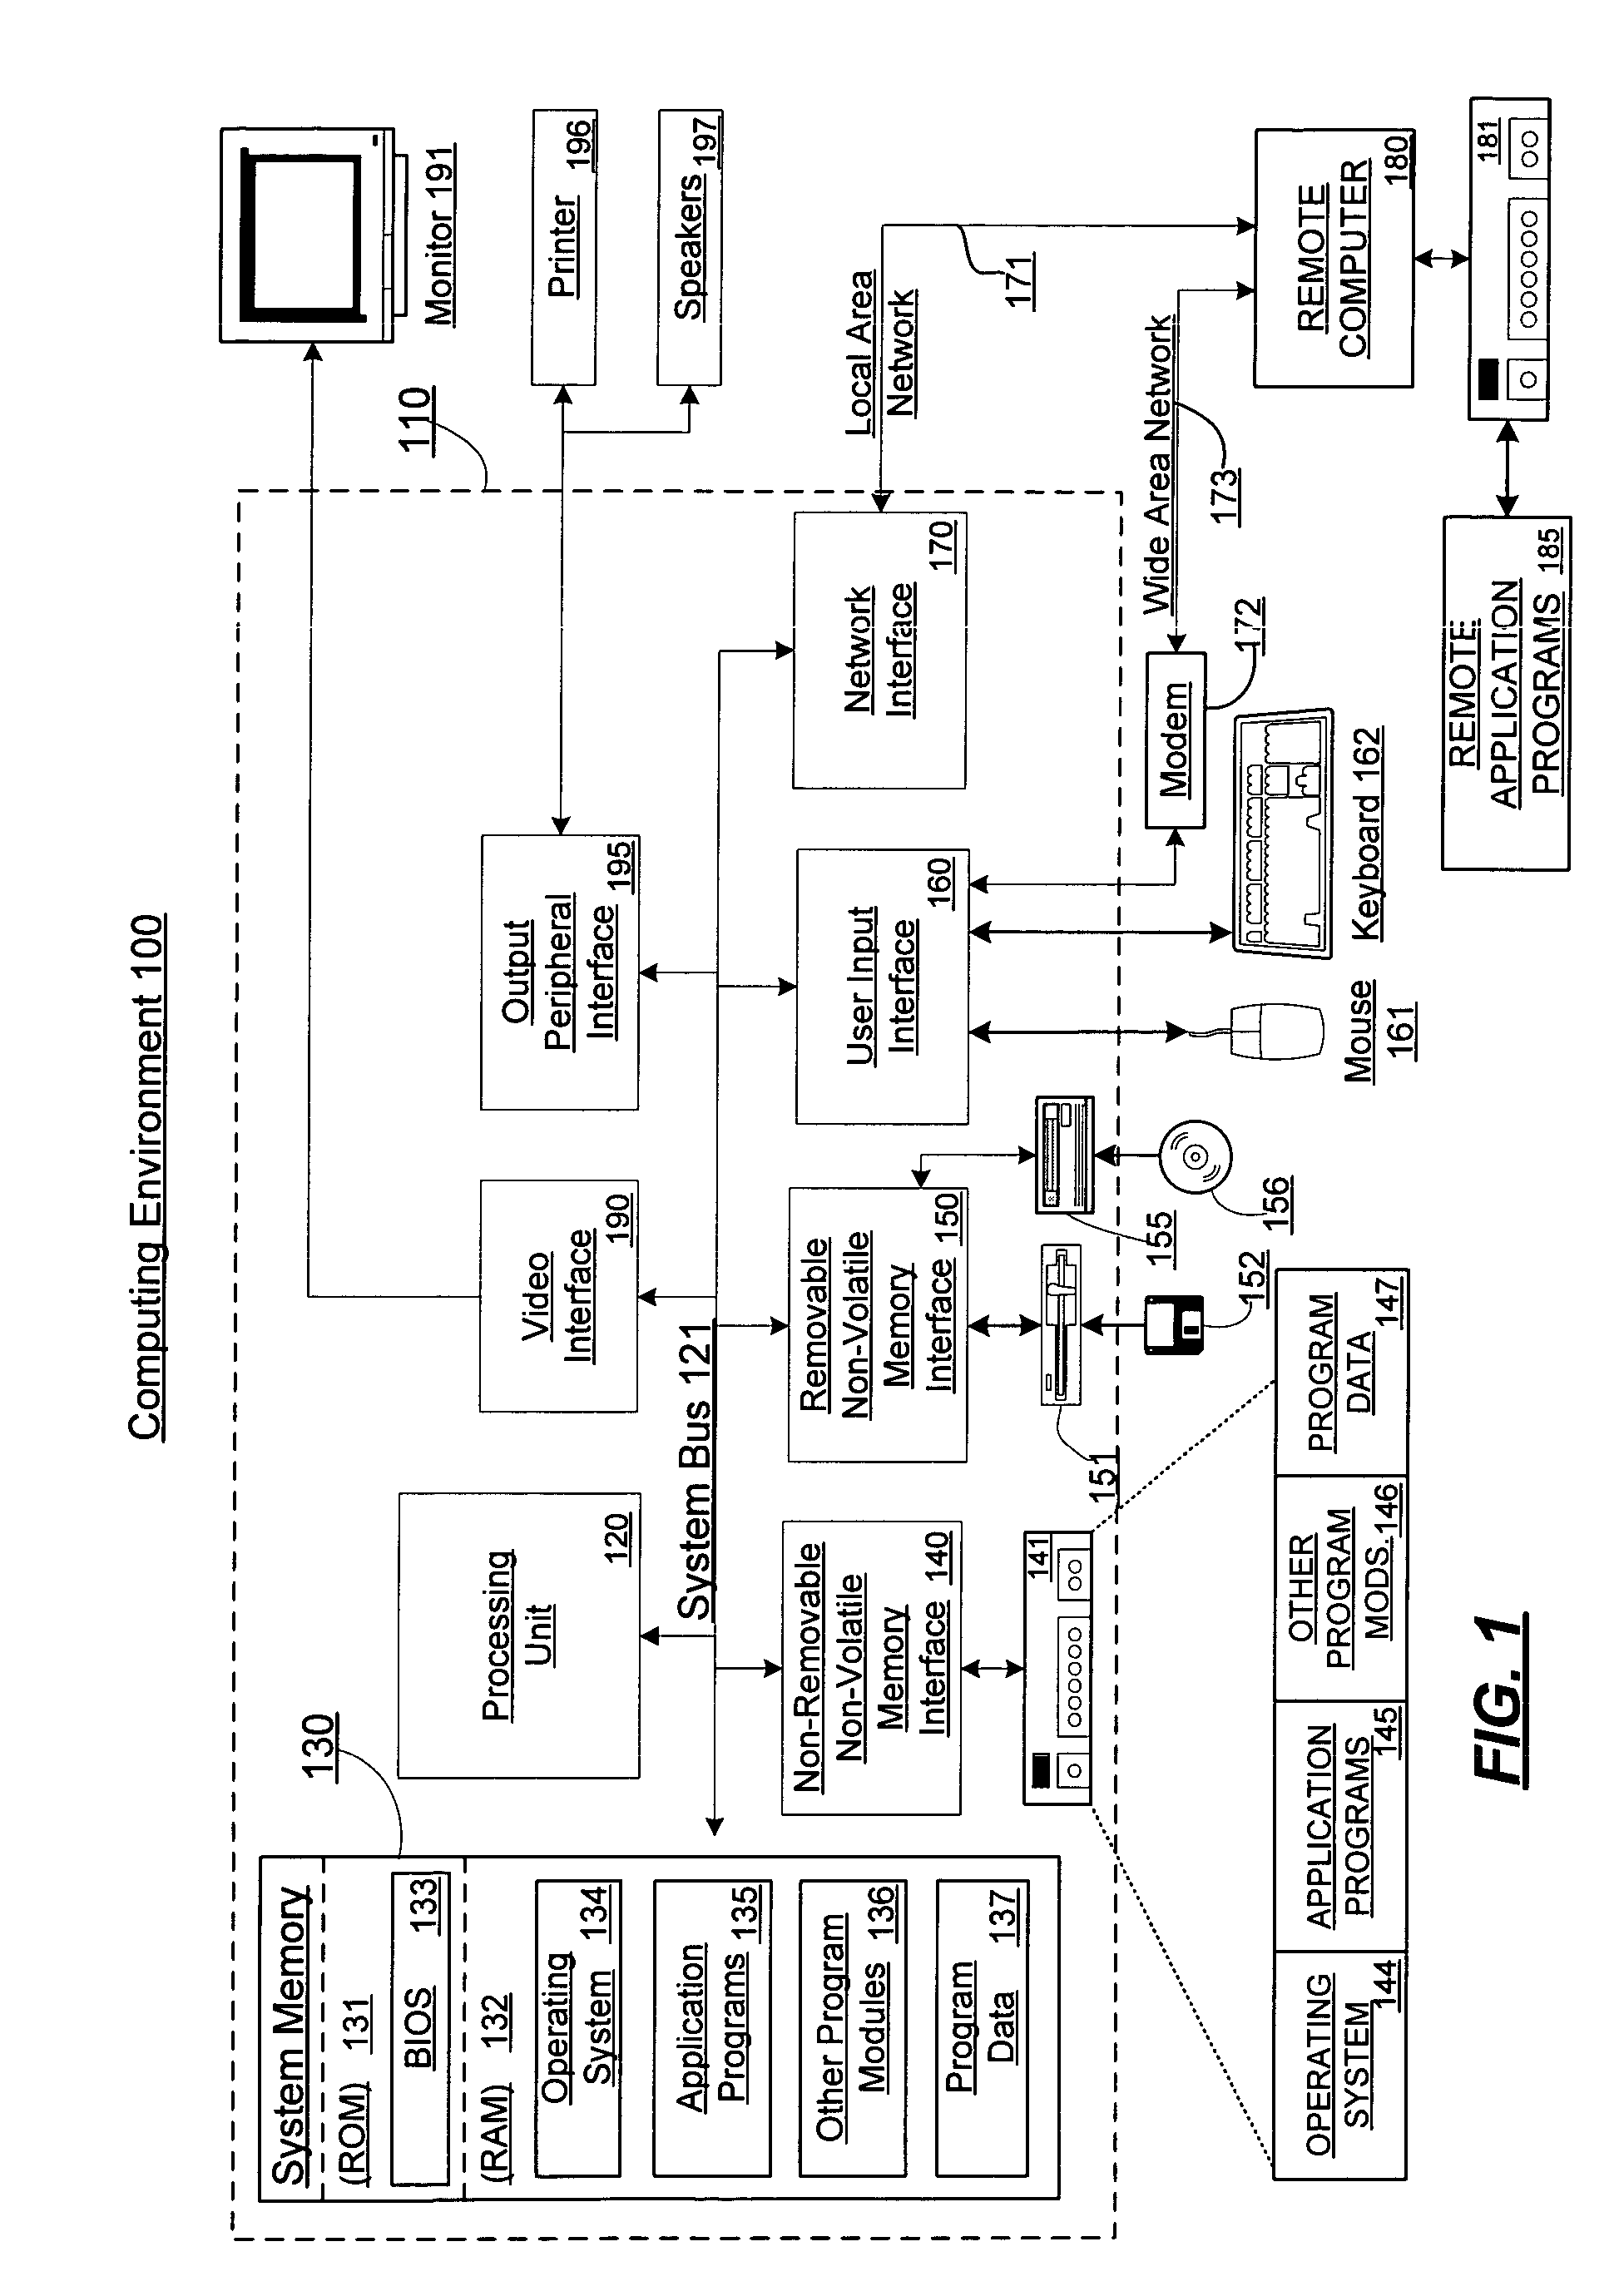 System and method for manifest generation